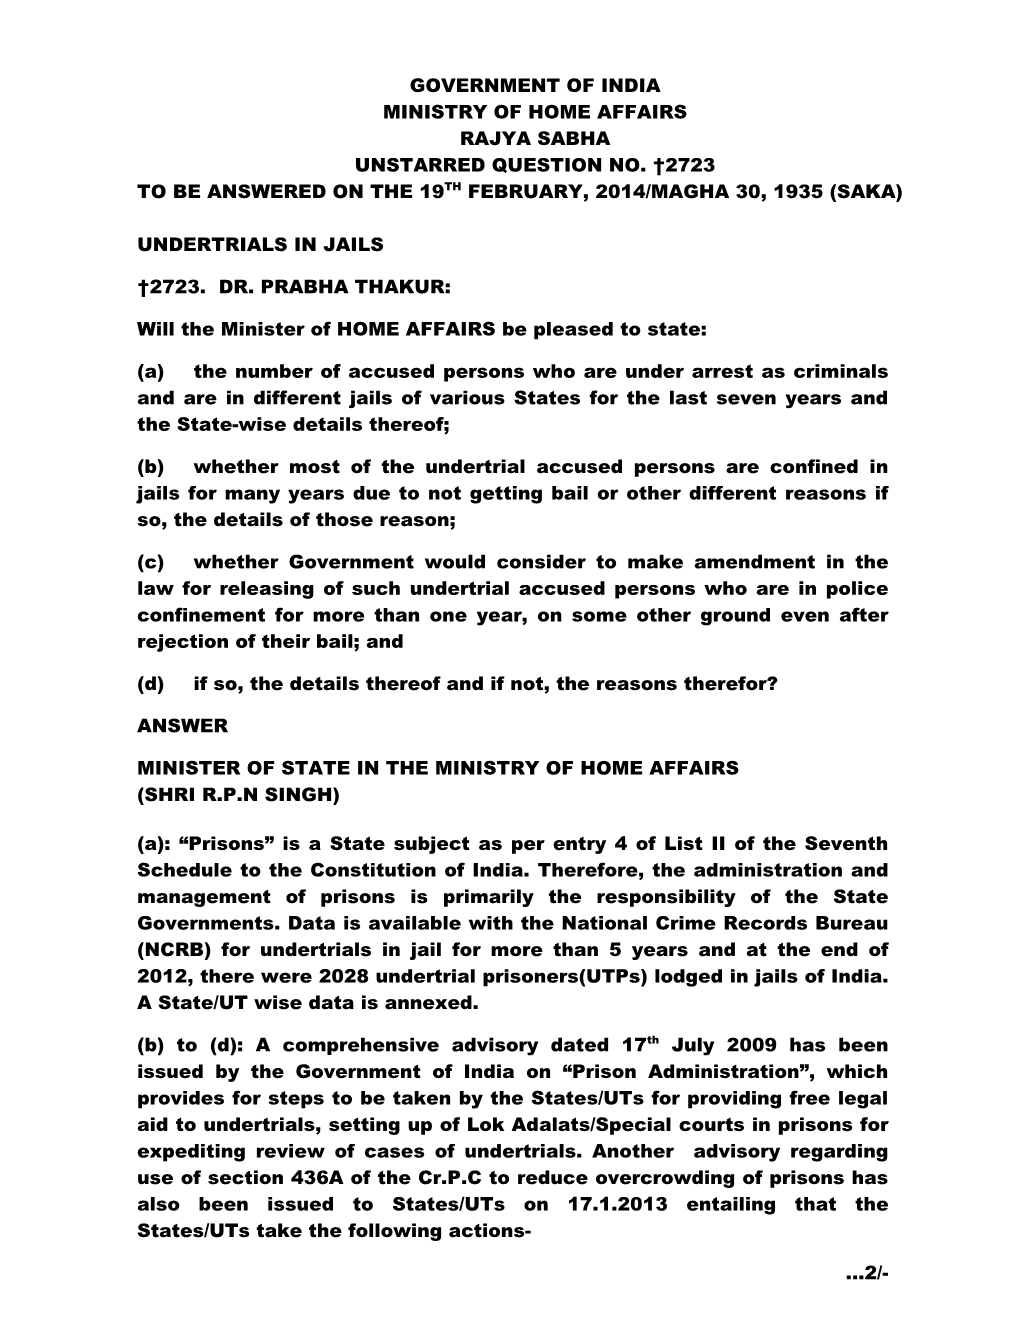 Government of India Ministry of Home Affairs Rajya Sabha Unstarred Question No